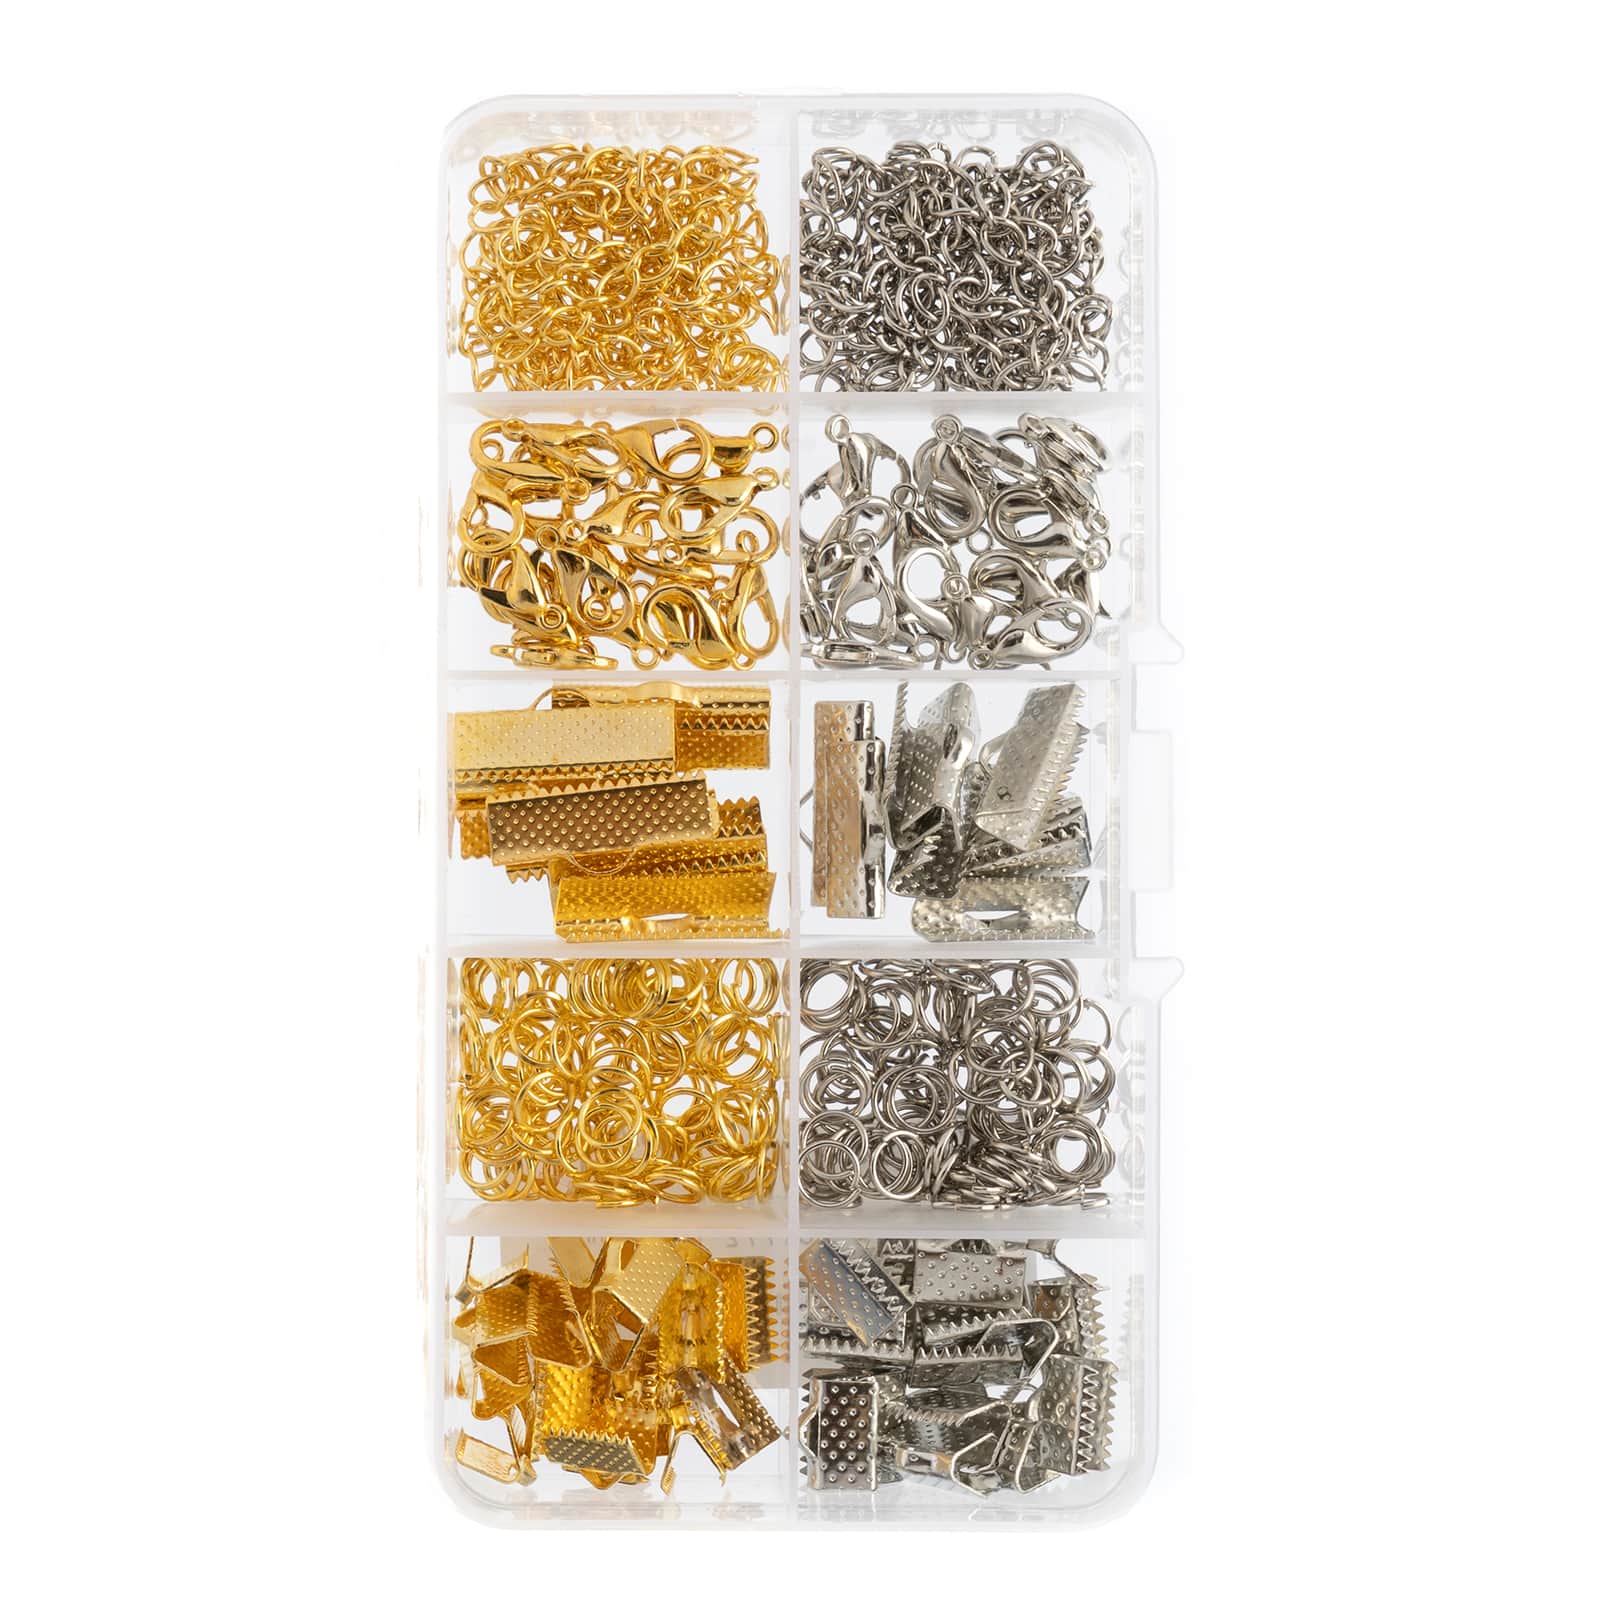 PURE GOLD HEALTHY HAIR KIT